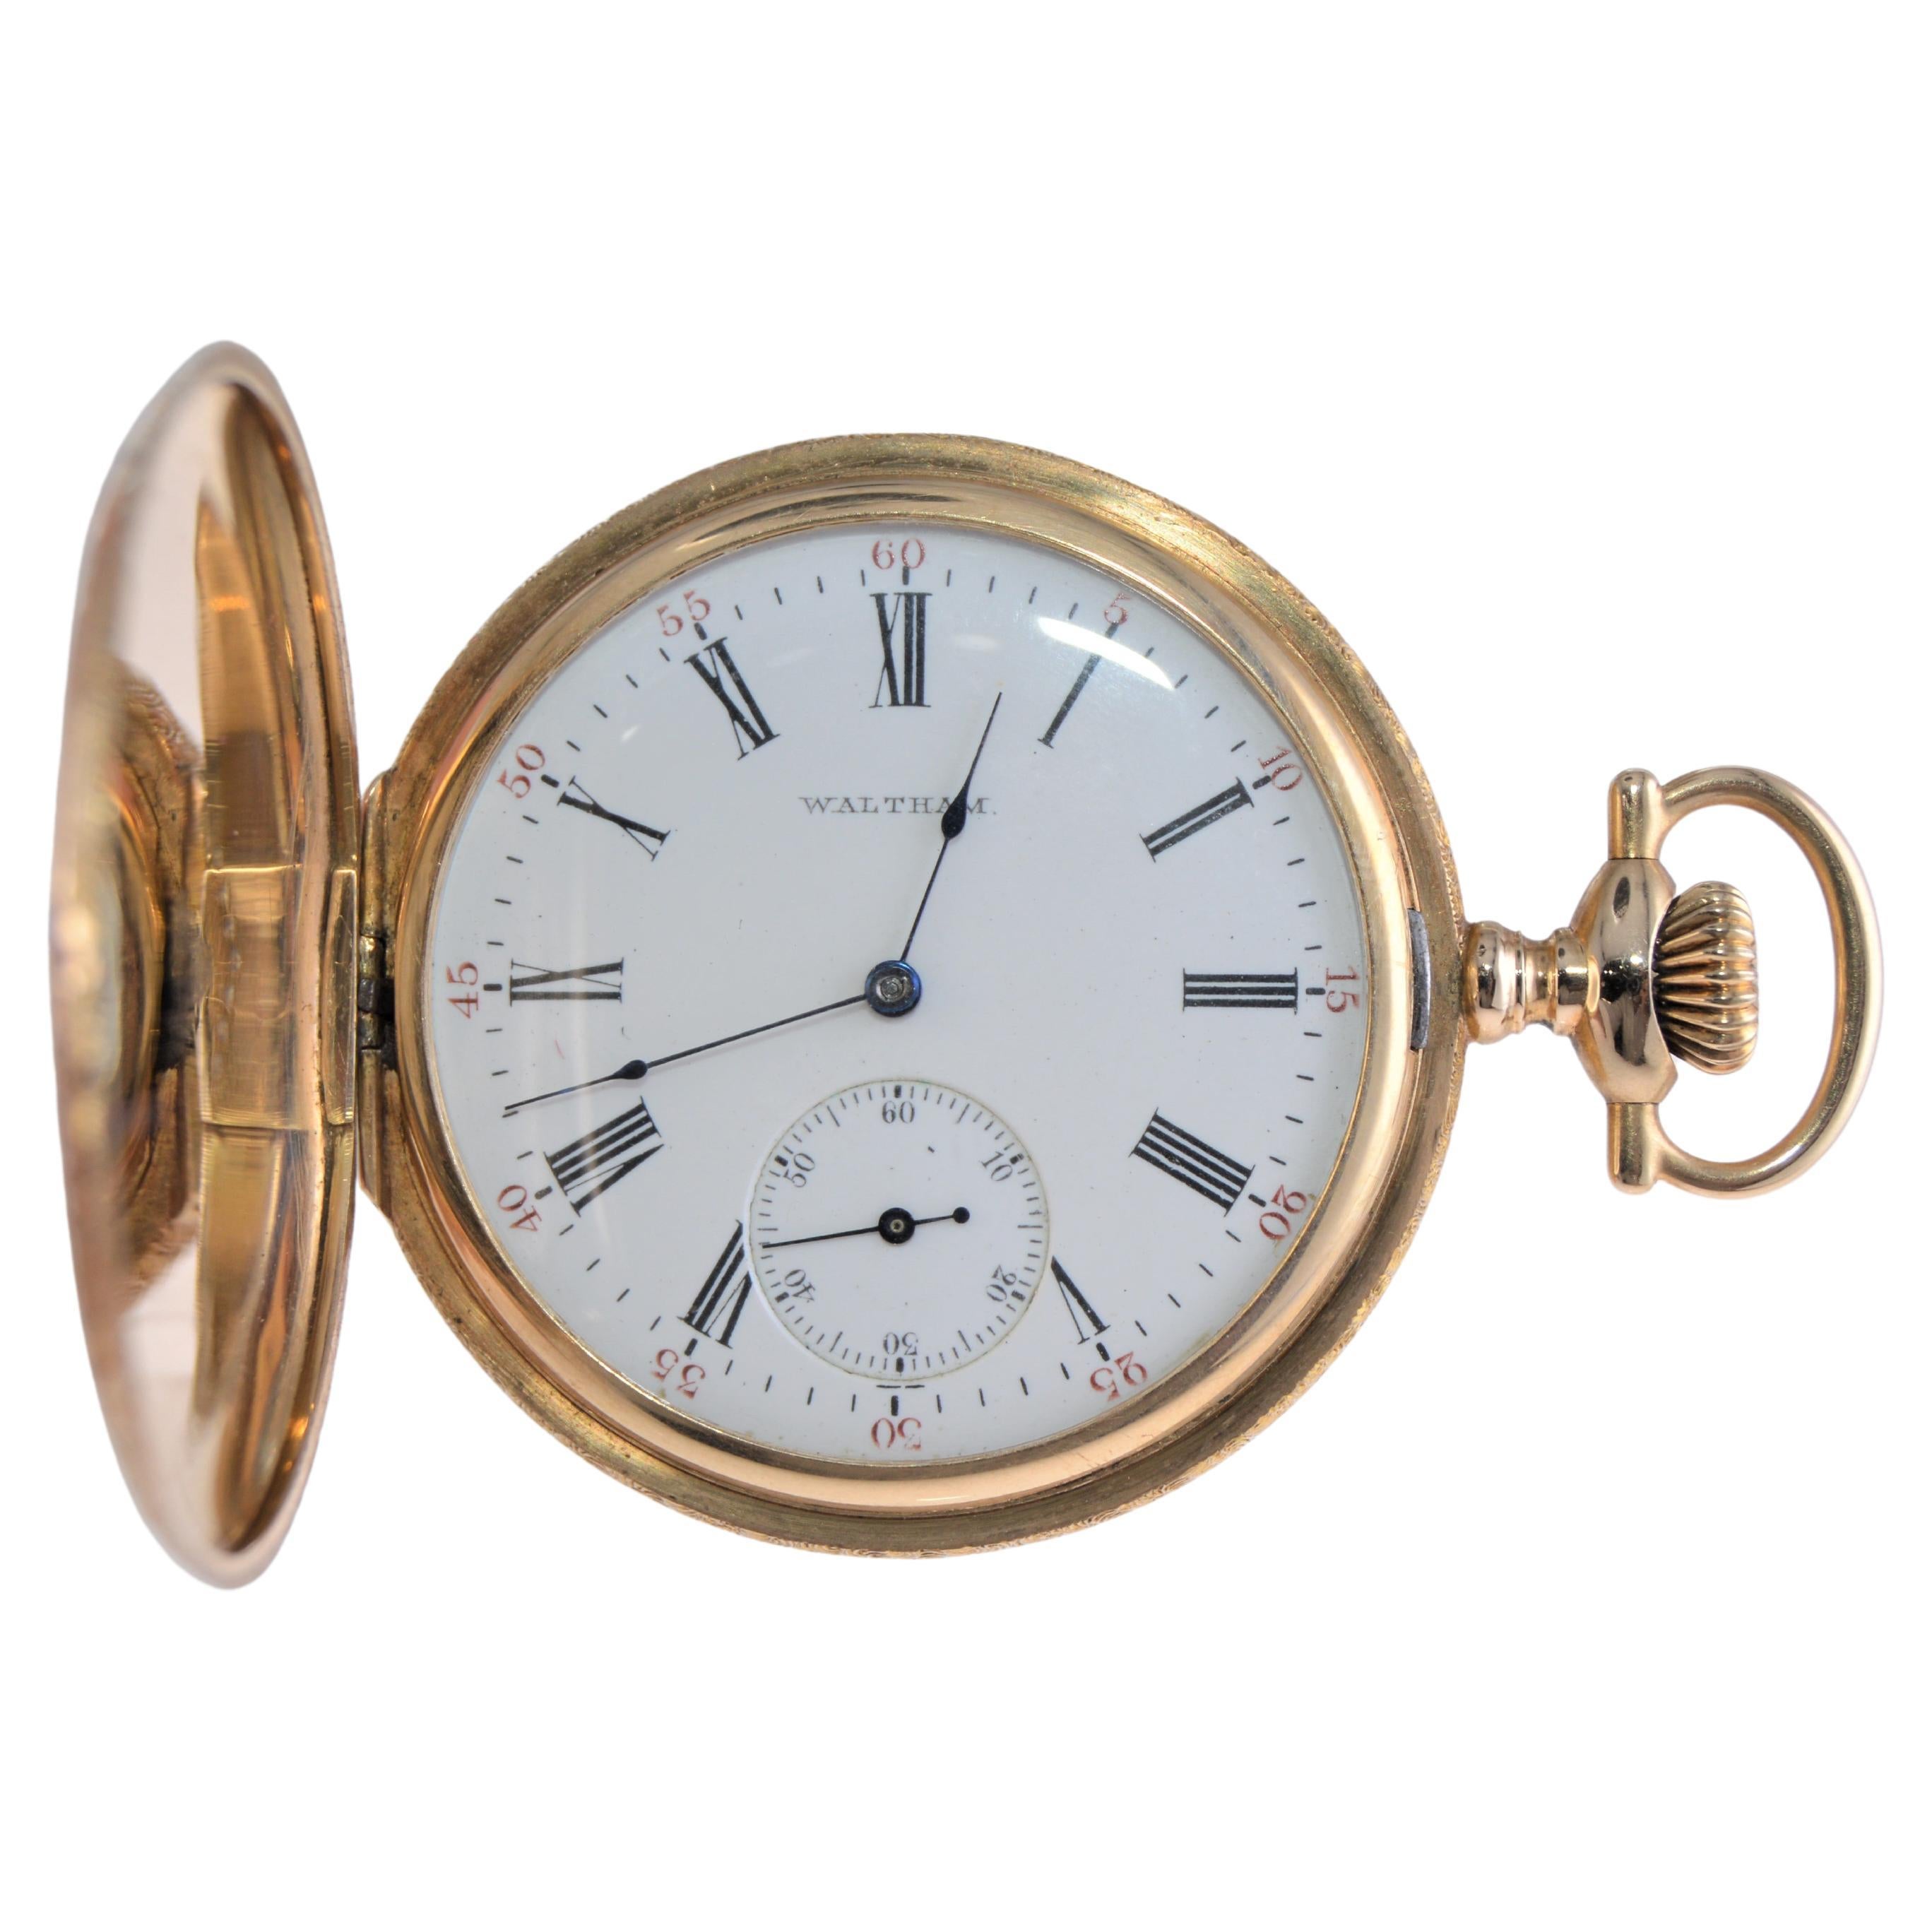 Waltham 14k Yellow Gold Hunters Cased Pocket Watch Circa 1900 Hand Engraved Pour hommes en vente